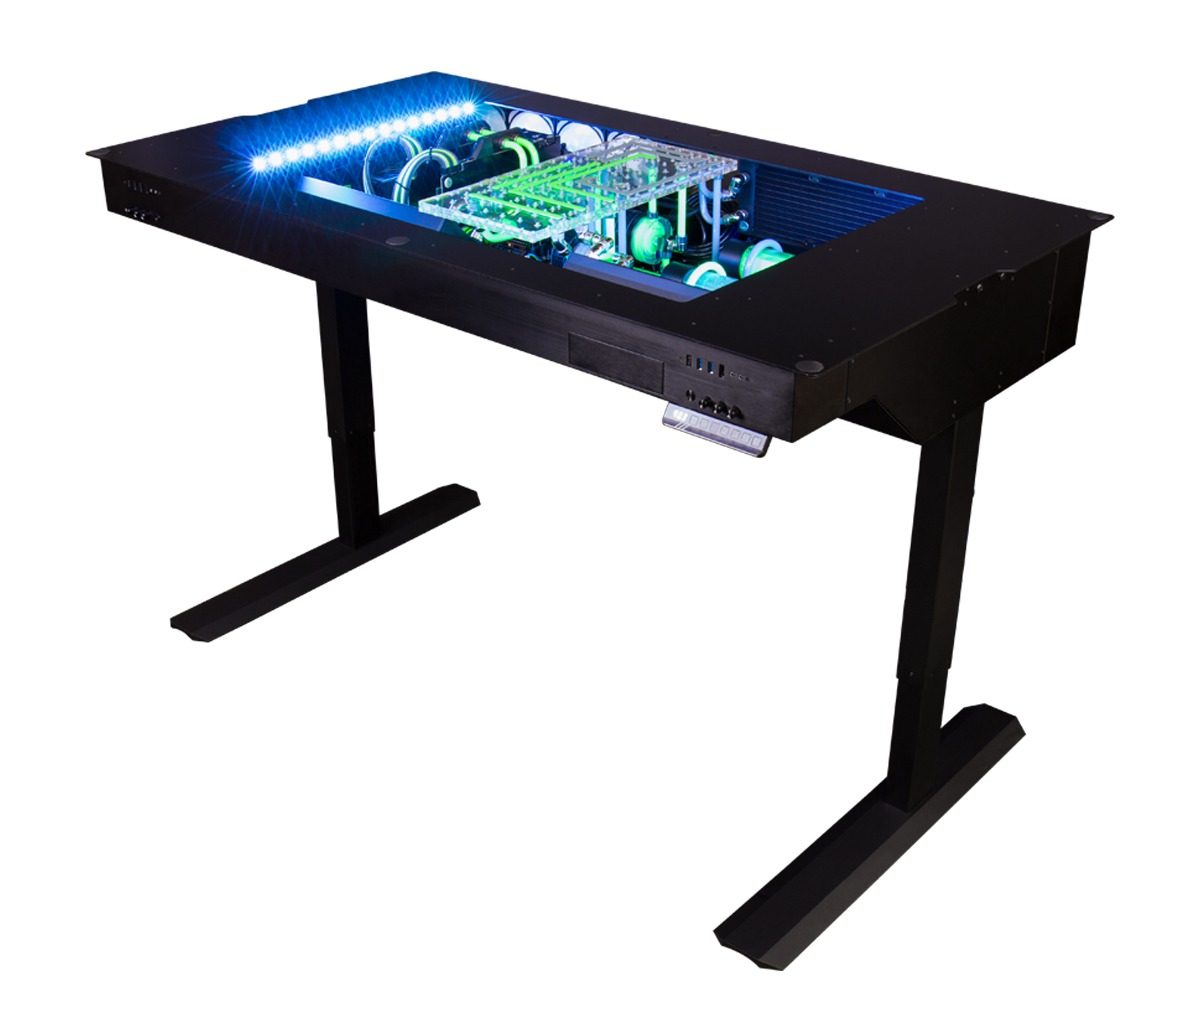 This Watercooled Gaming Desk Was Designed To Push Boundaries